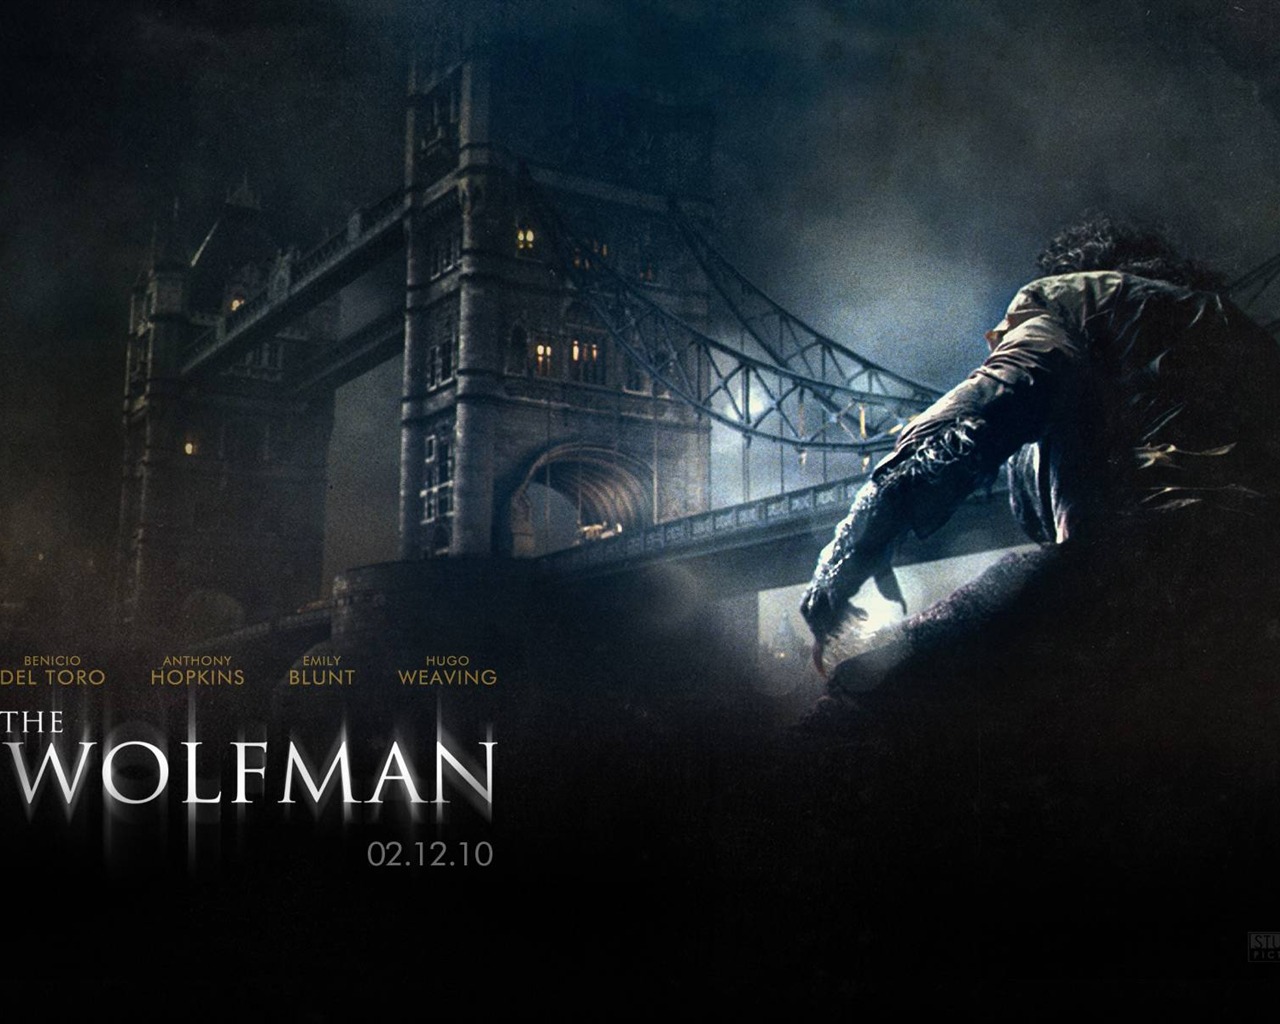 The Wolfman Movie Wallpapers #5 - 1280x1024